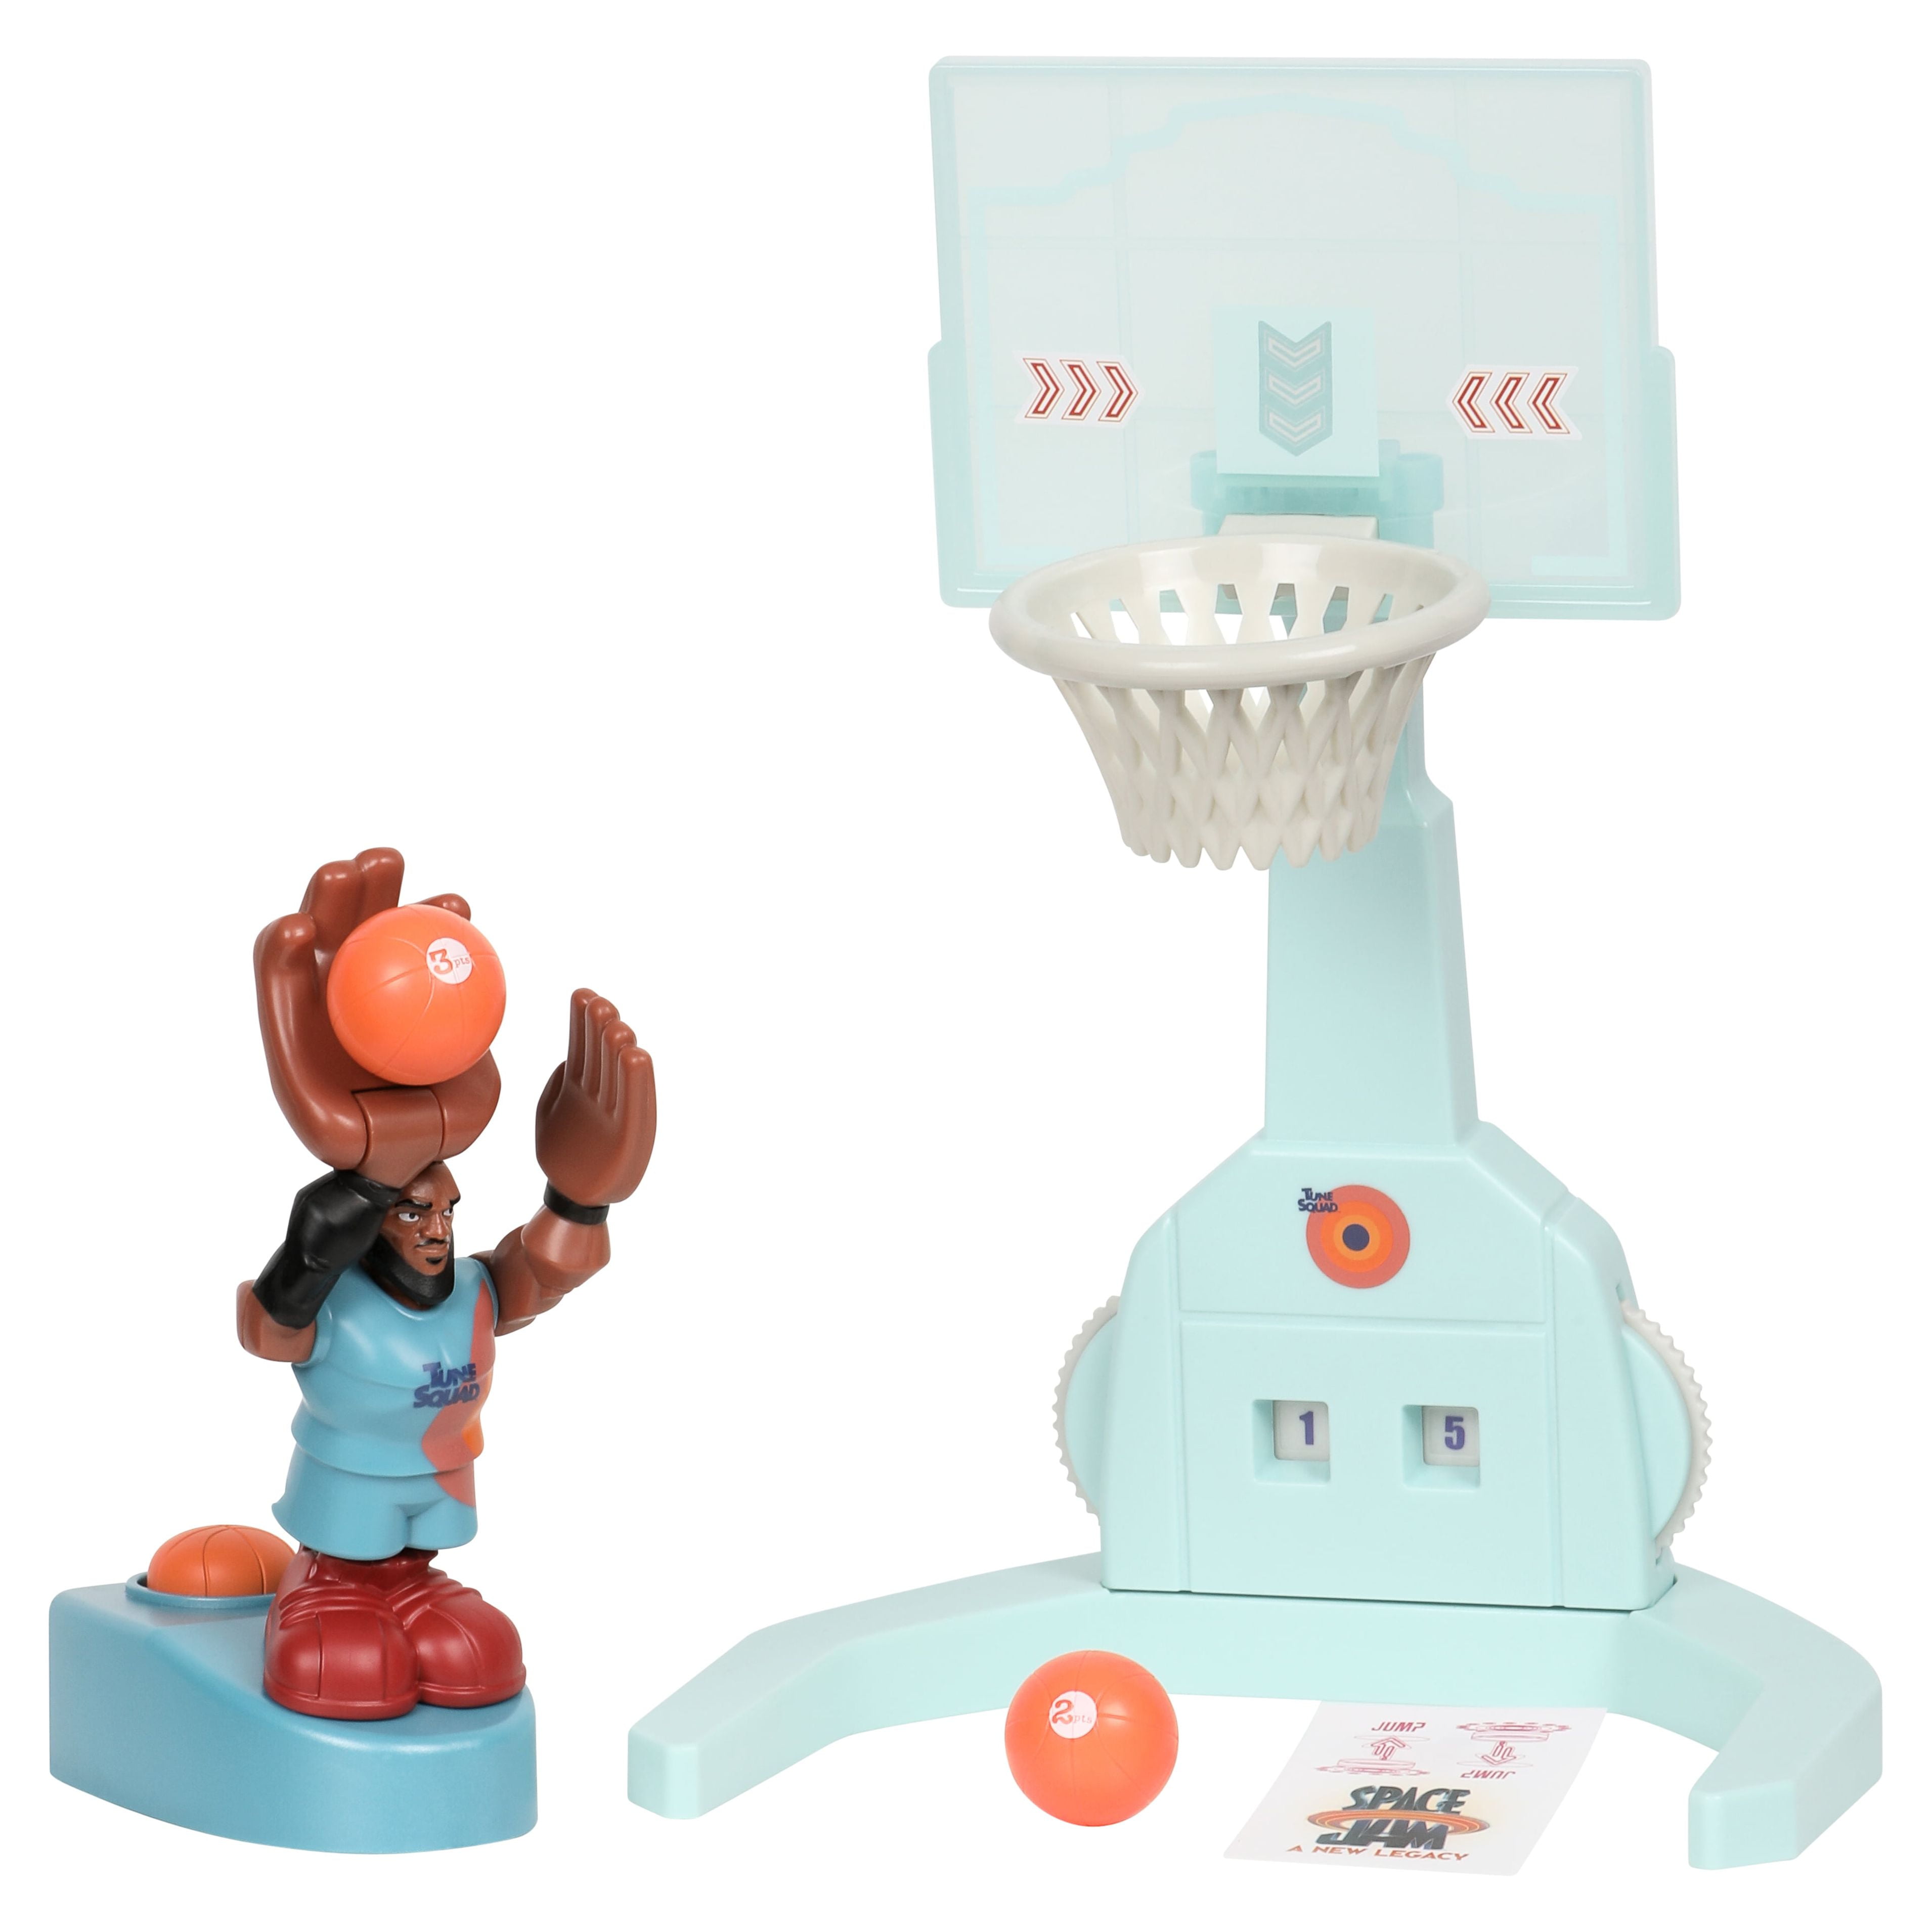 Space Jam: A New Legacy - Super Shoot & Dunk Playset with LeBron James  Figure